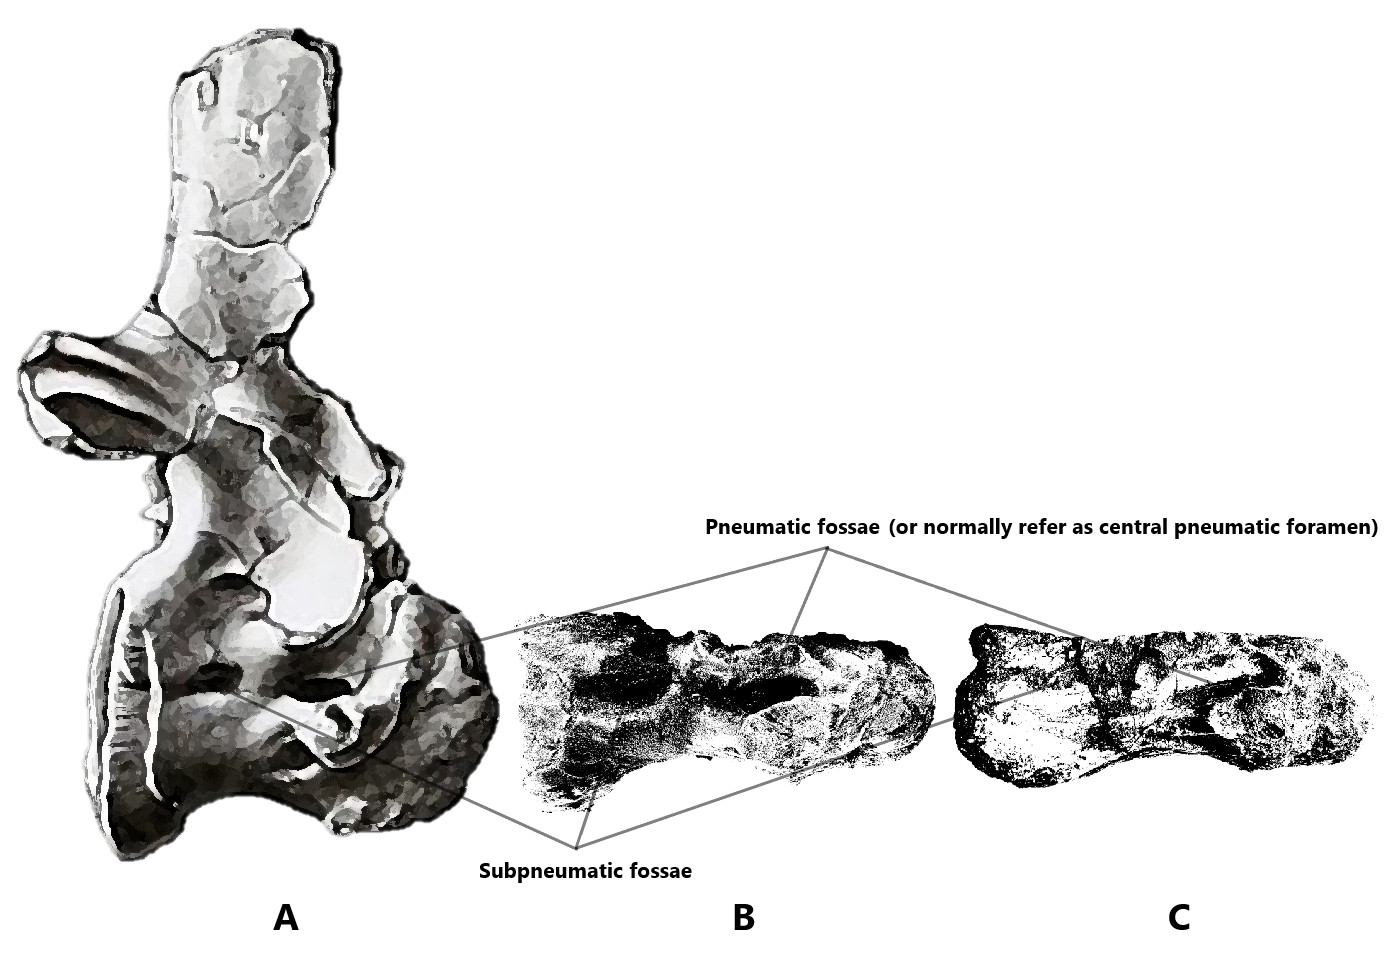 Comparison of cervical vertebra of Egypt Spinosaurid Spinosaurus aegyptiacus[8] with one of the species of Morocco Spinosaurid tentatively refer as Spinosaurus dorsojuvencus. Both species develop a similar subpneumatic fossae behind the primary pneumatic fossae. From left to right: A. Posterior cervical vertebra of Spinosaurus aegyptiacus (BSP 1912 VIII 19); B. Mid cervical vertebra (GCE2104138334) of Alpha Male 9109; C. Anterior cervical vertebra (GCE2105098997A) of Sigma Neck 8997.